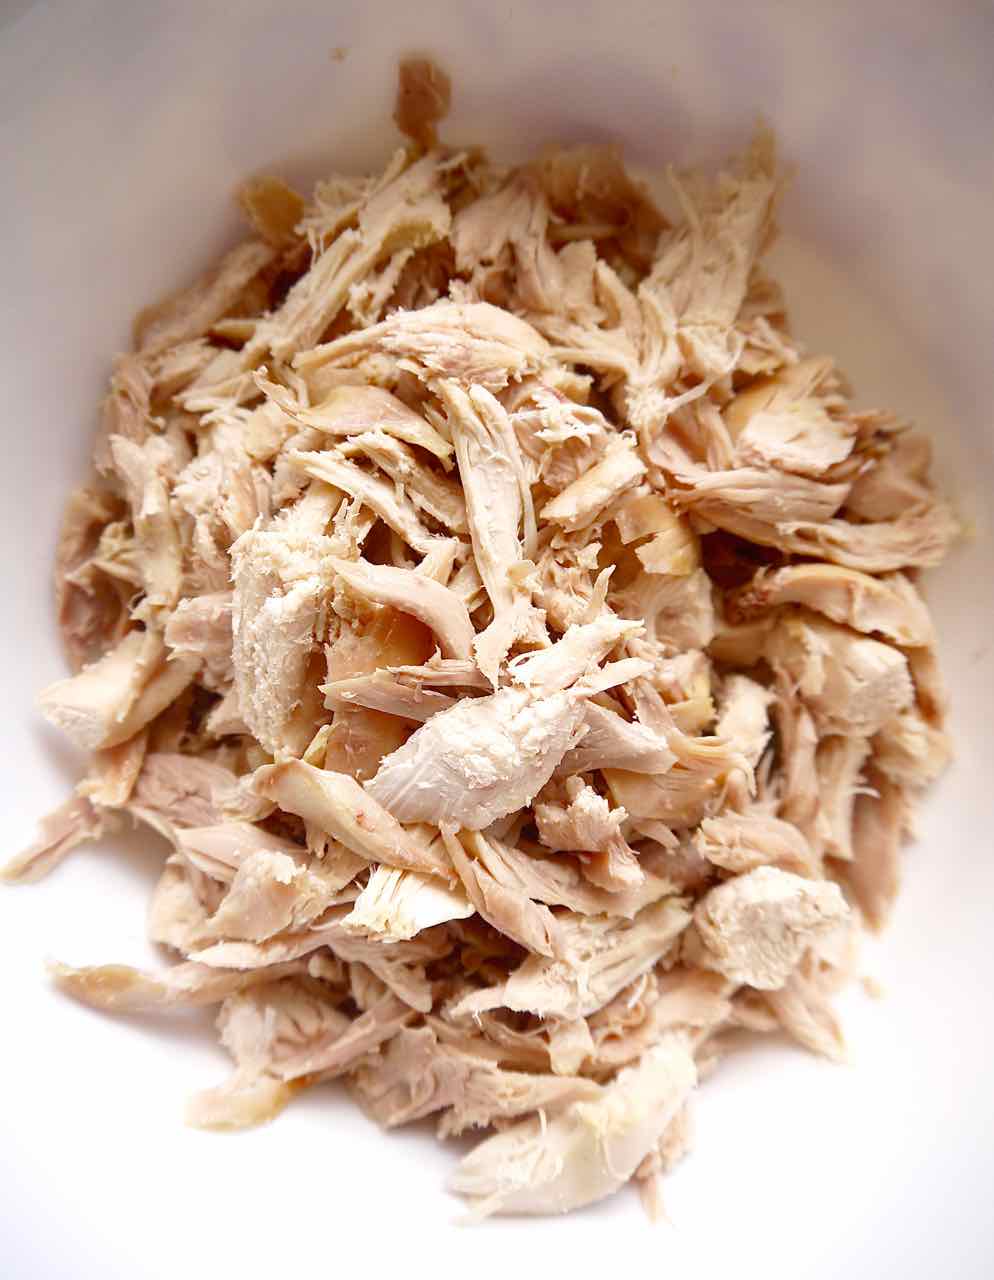 Rotisserie chicken meat in small pieces in a bowl.